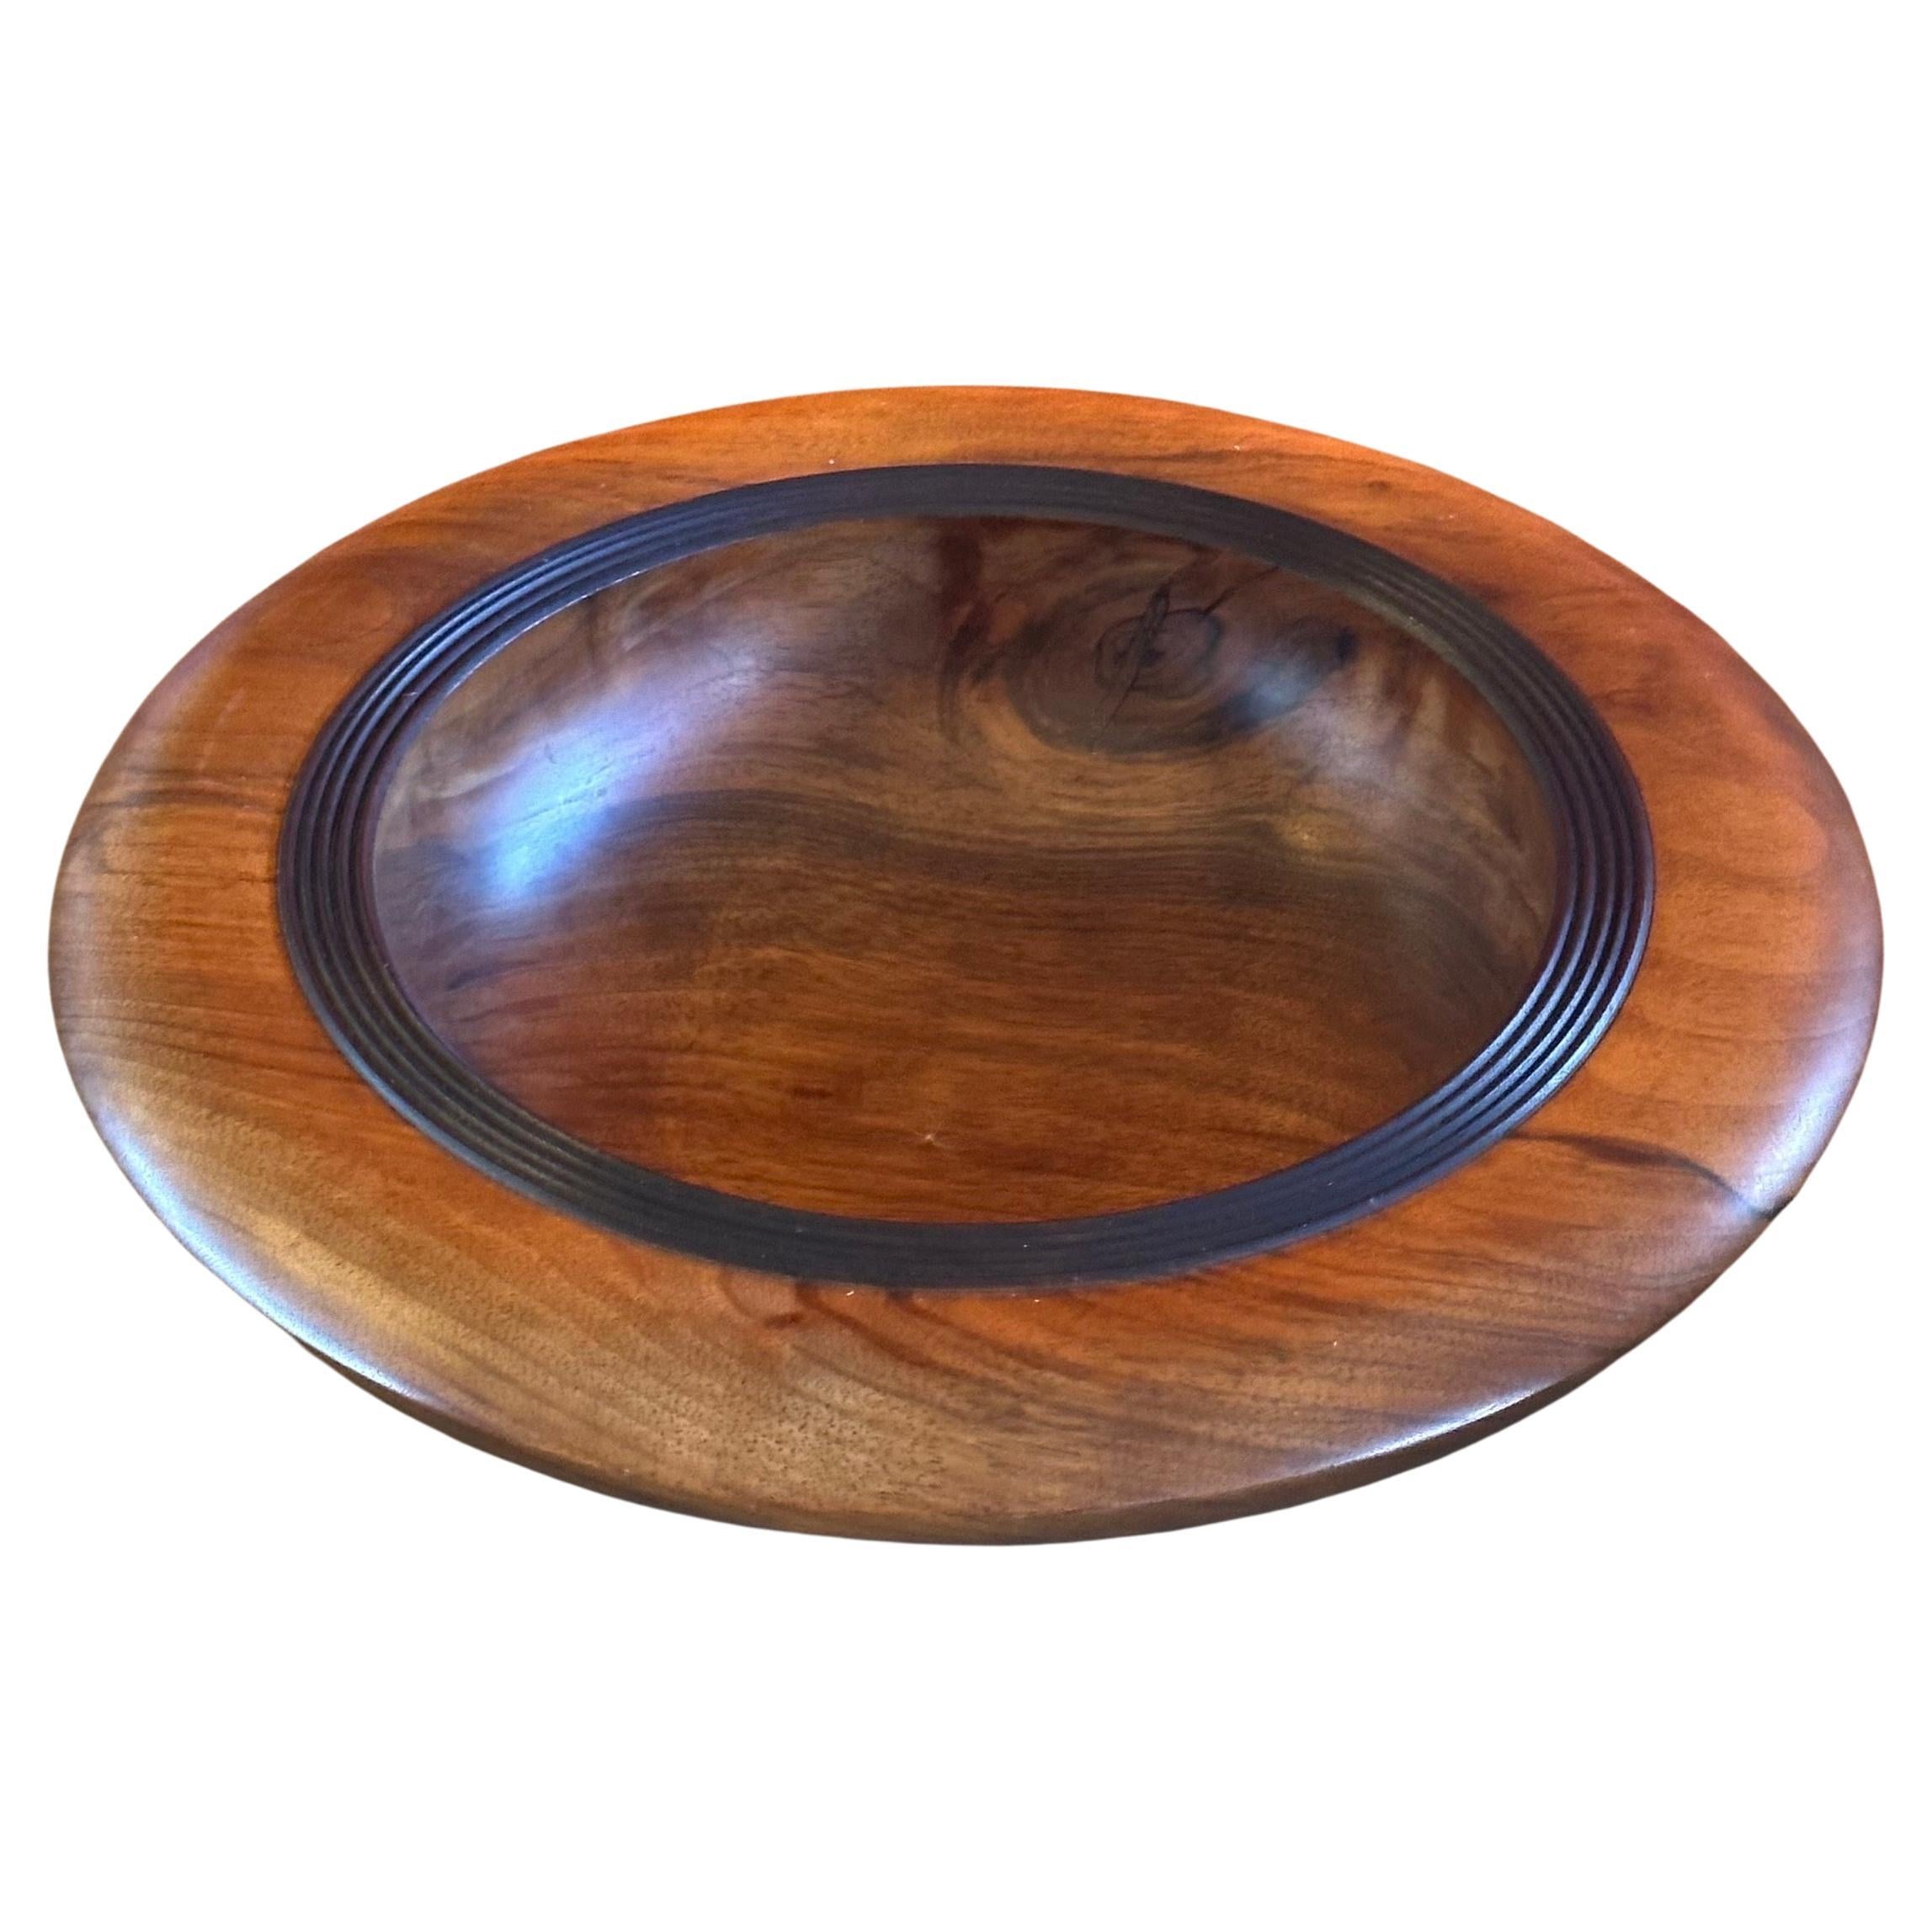 New Zealand Bowls and Baskets